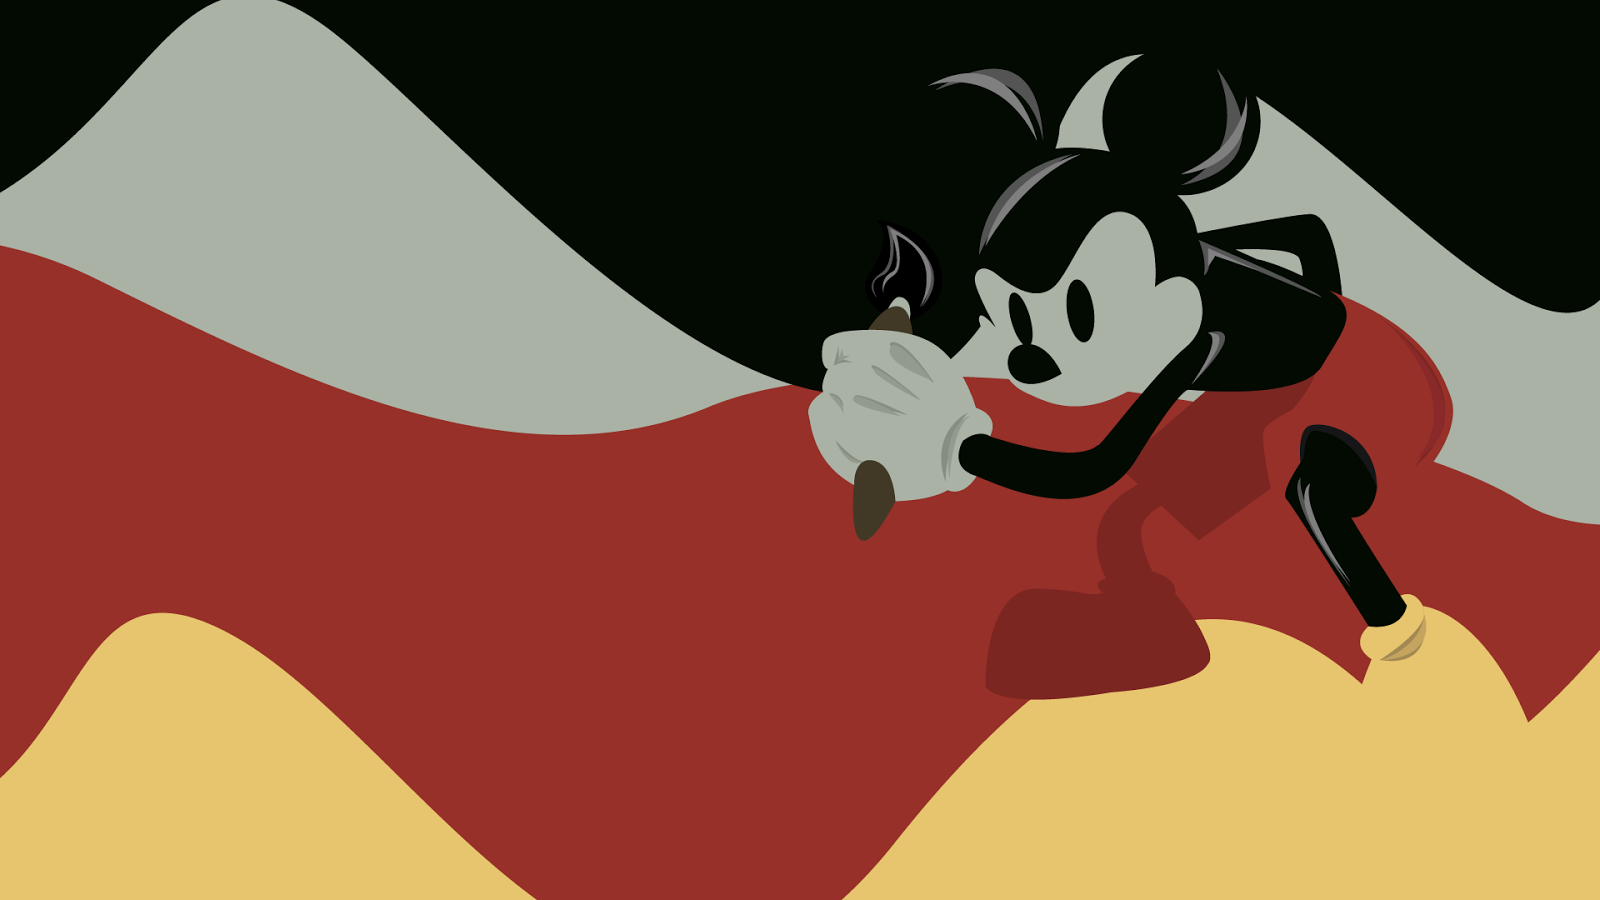 Black Mickey Mouse Wallpaper image